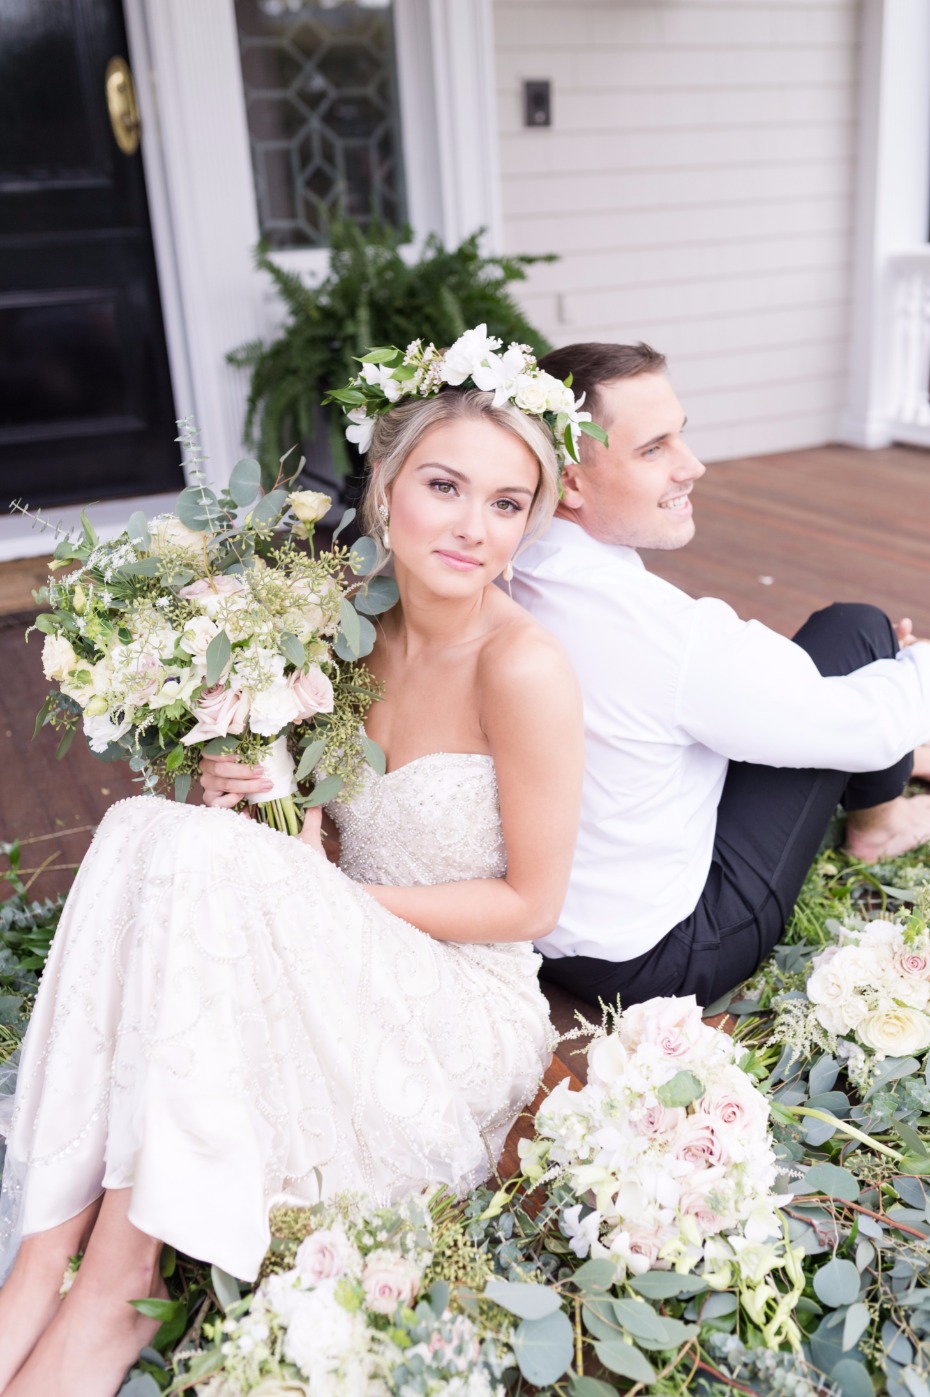 wedding photo ideas for the bride and groom